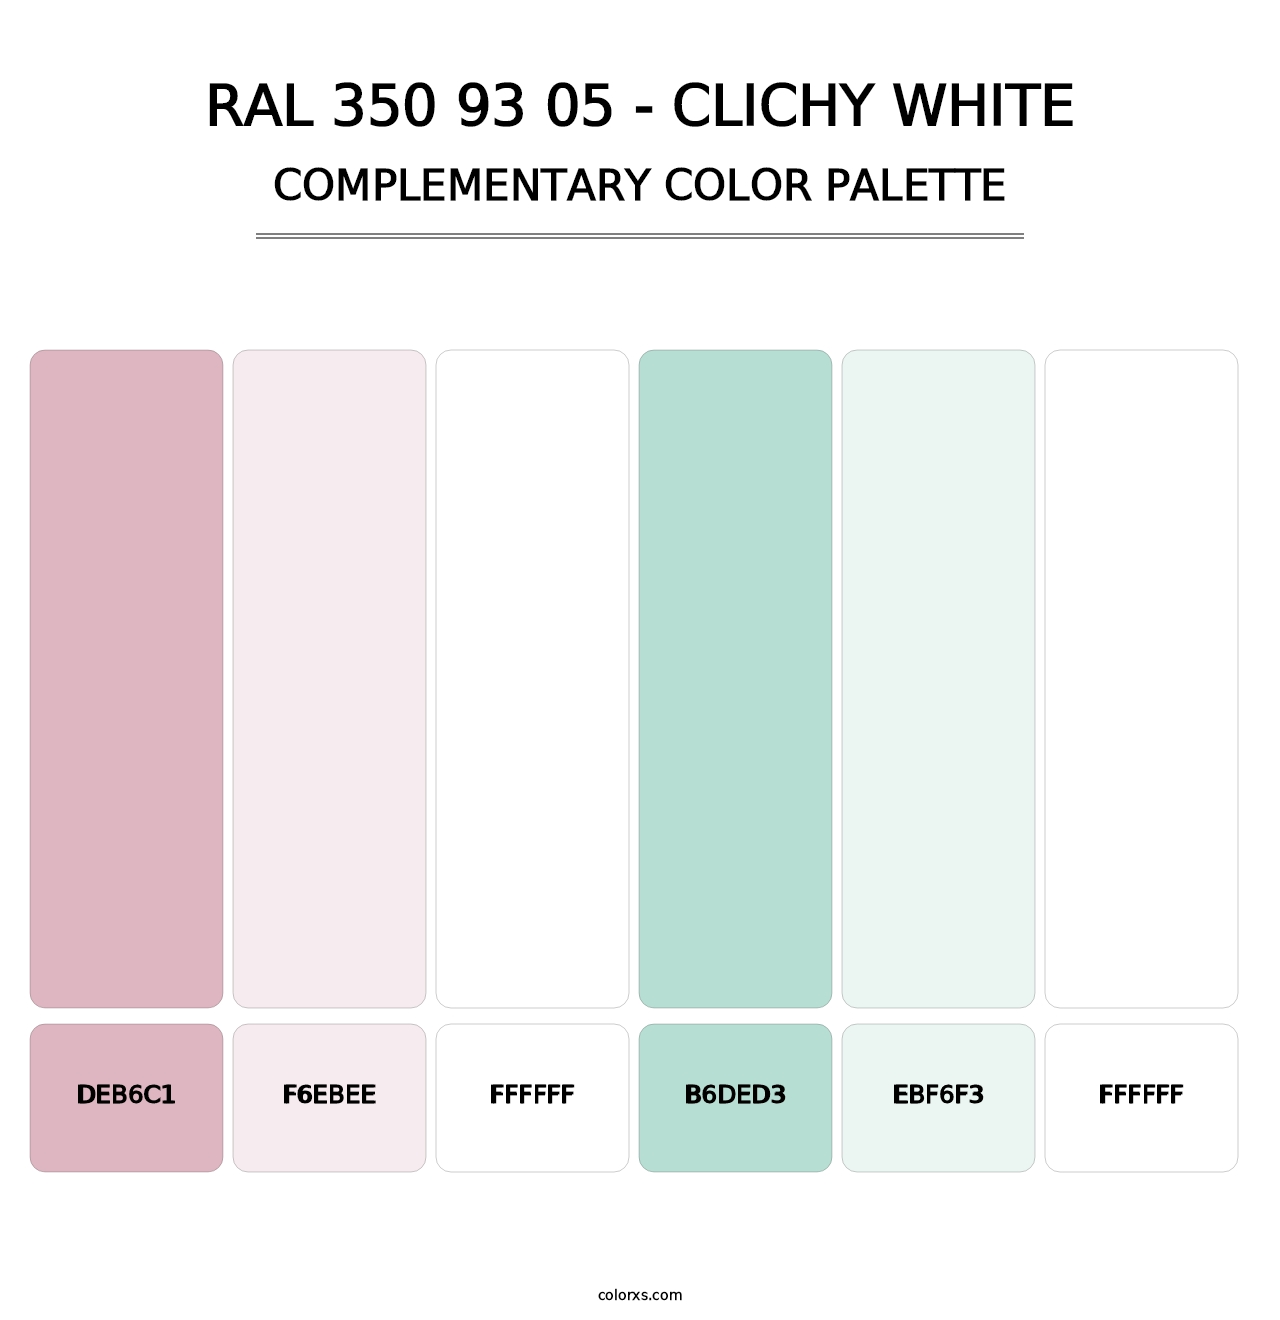 RAL 350 93 05 - Clichy White - Complementary Color Palette